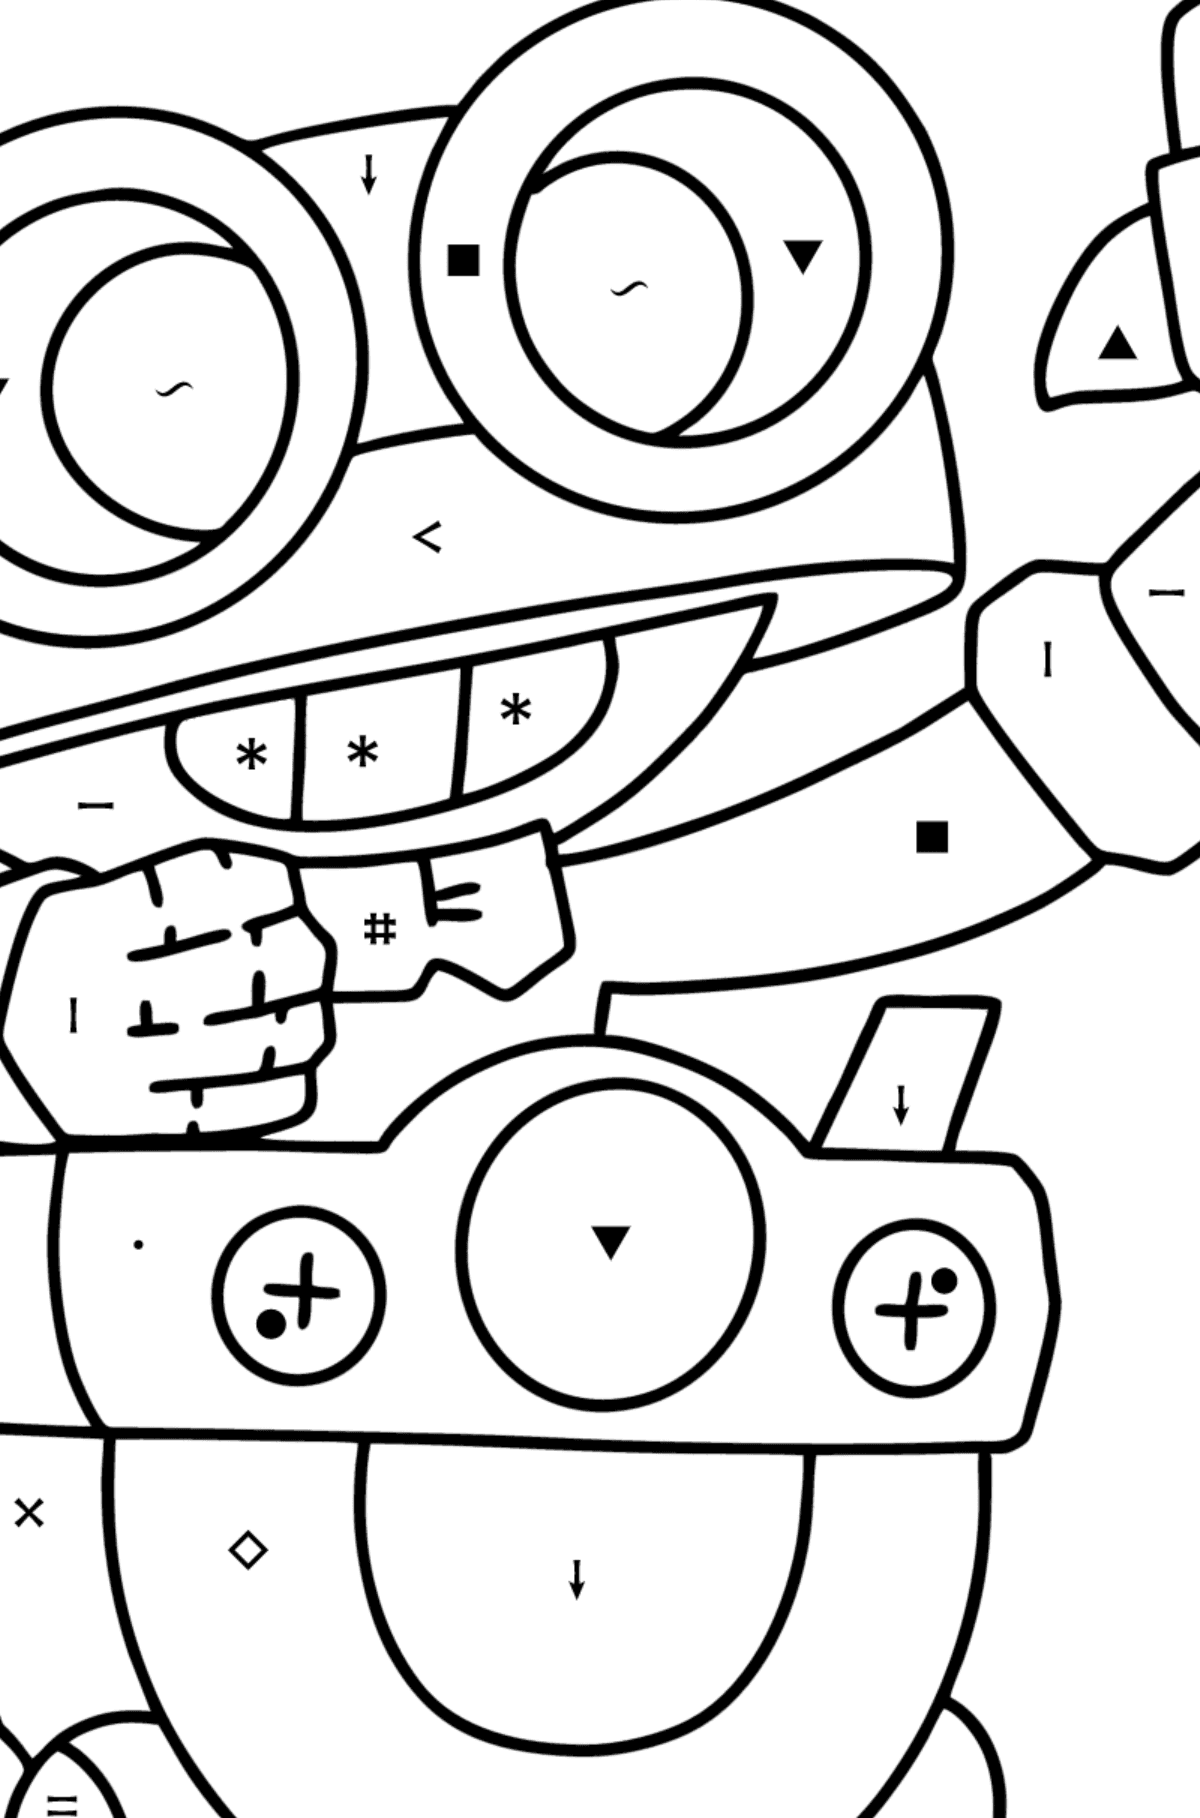 Brawl Stars Carl coloring page - Coloring by Symbols for Kids